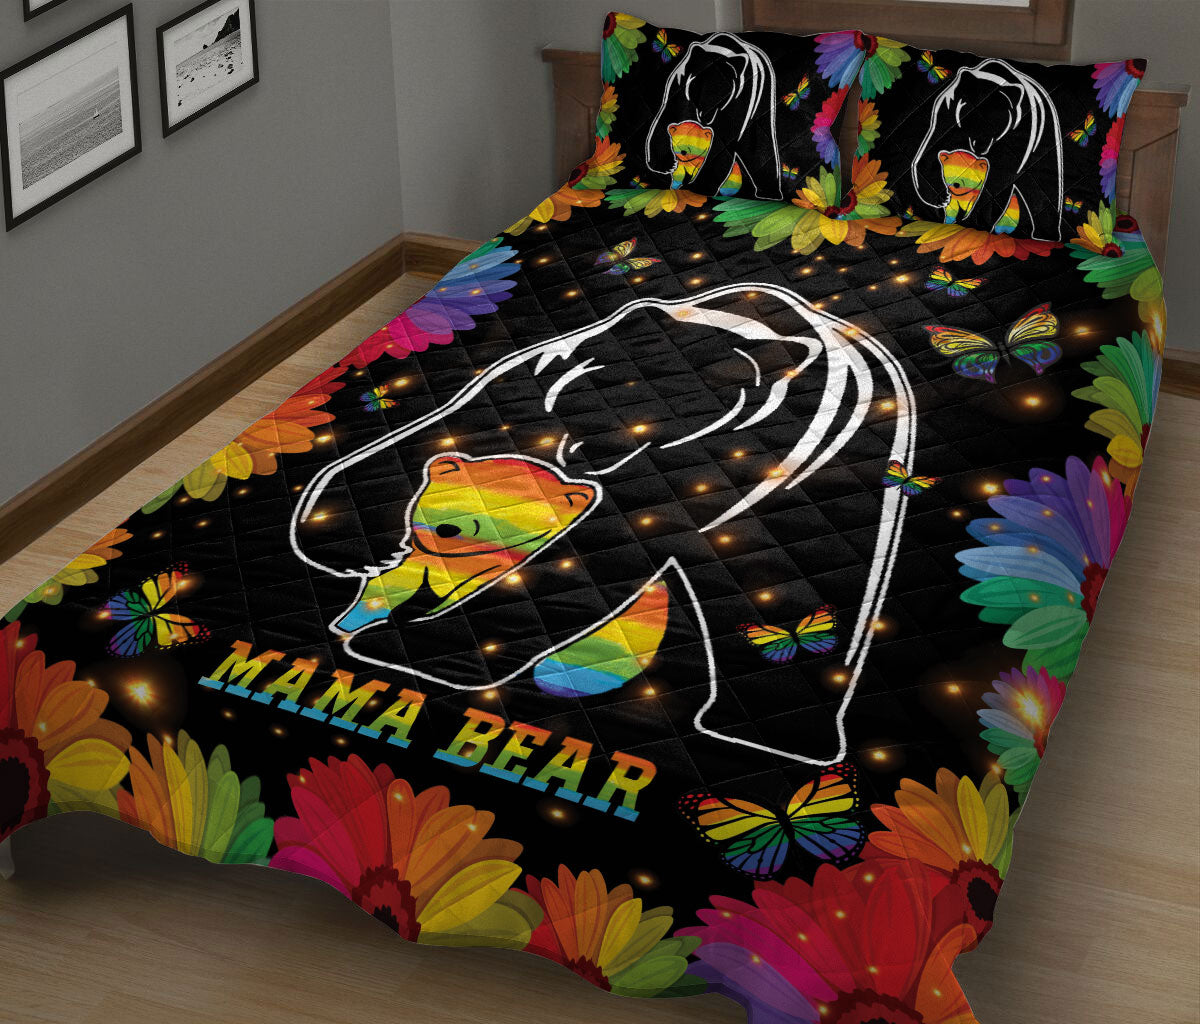 Ohaprints-Quilt-Bed-Set-Pillowcase-Mama-Bear-Rainbow-Sunflower-Lgbt-Pride-Support-Lgbt-Child-Unique-Idea-Blanket-Bedspread-Bedding-74-King (90'' x 100'')